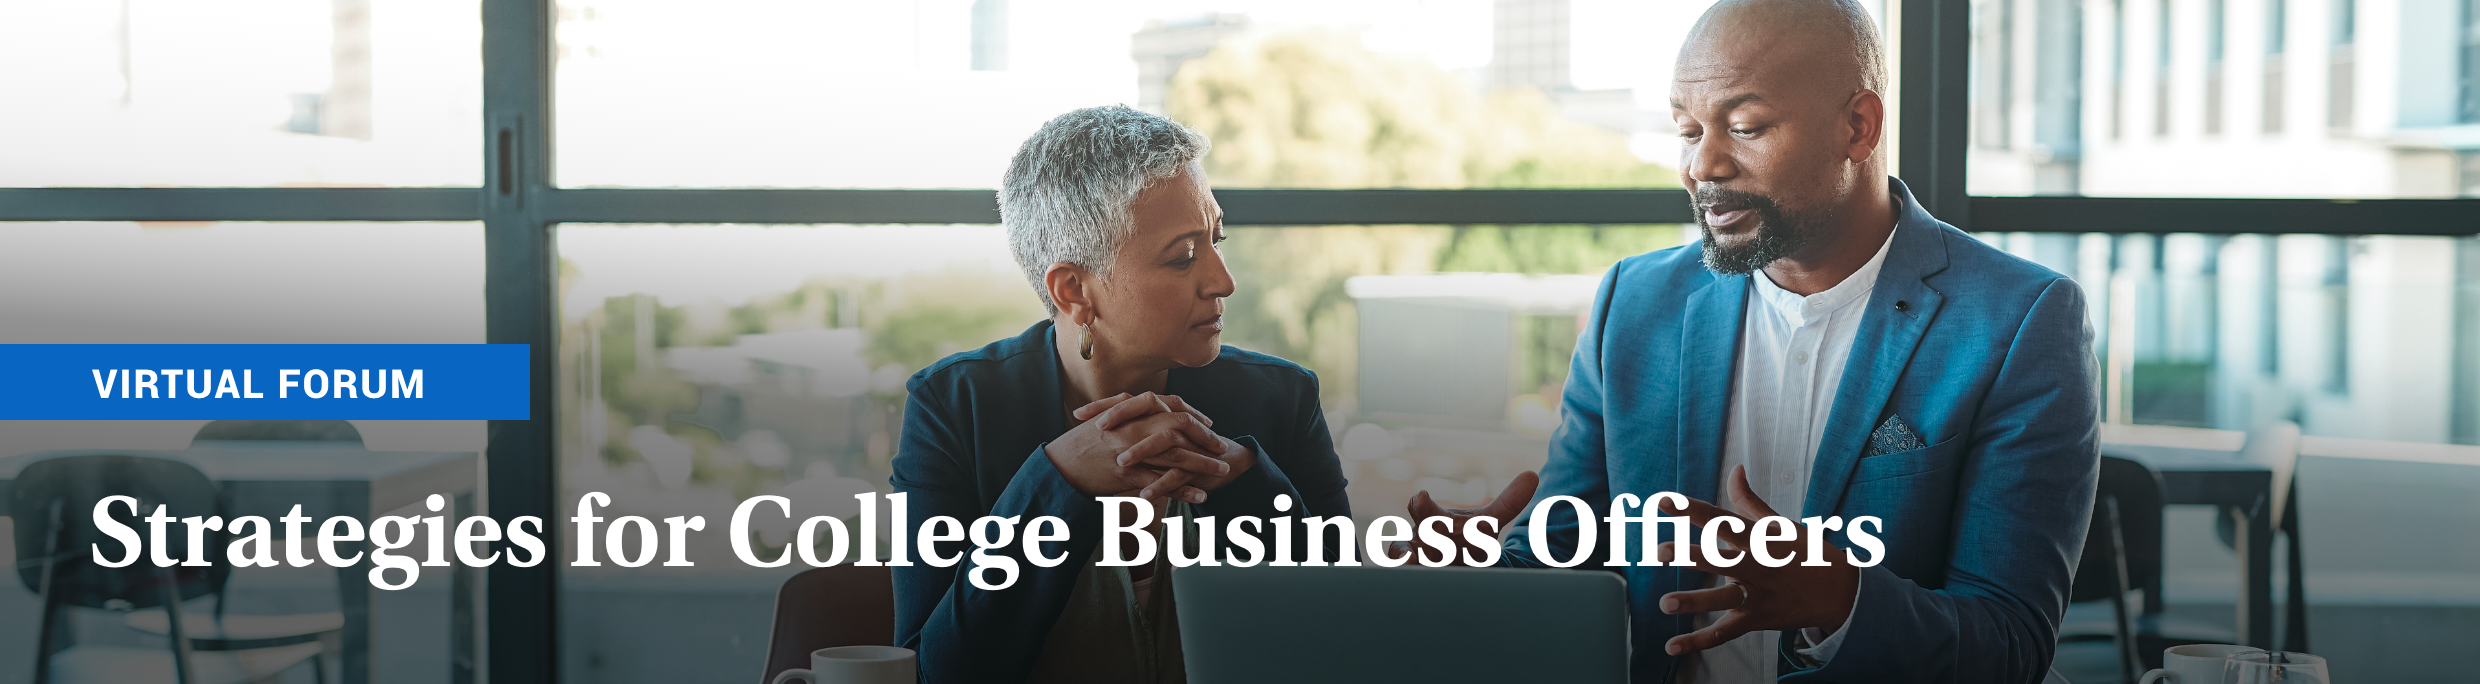 Strategies for College Business Officers